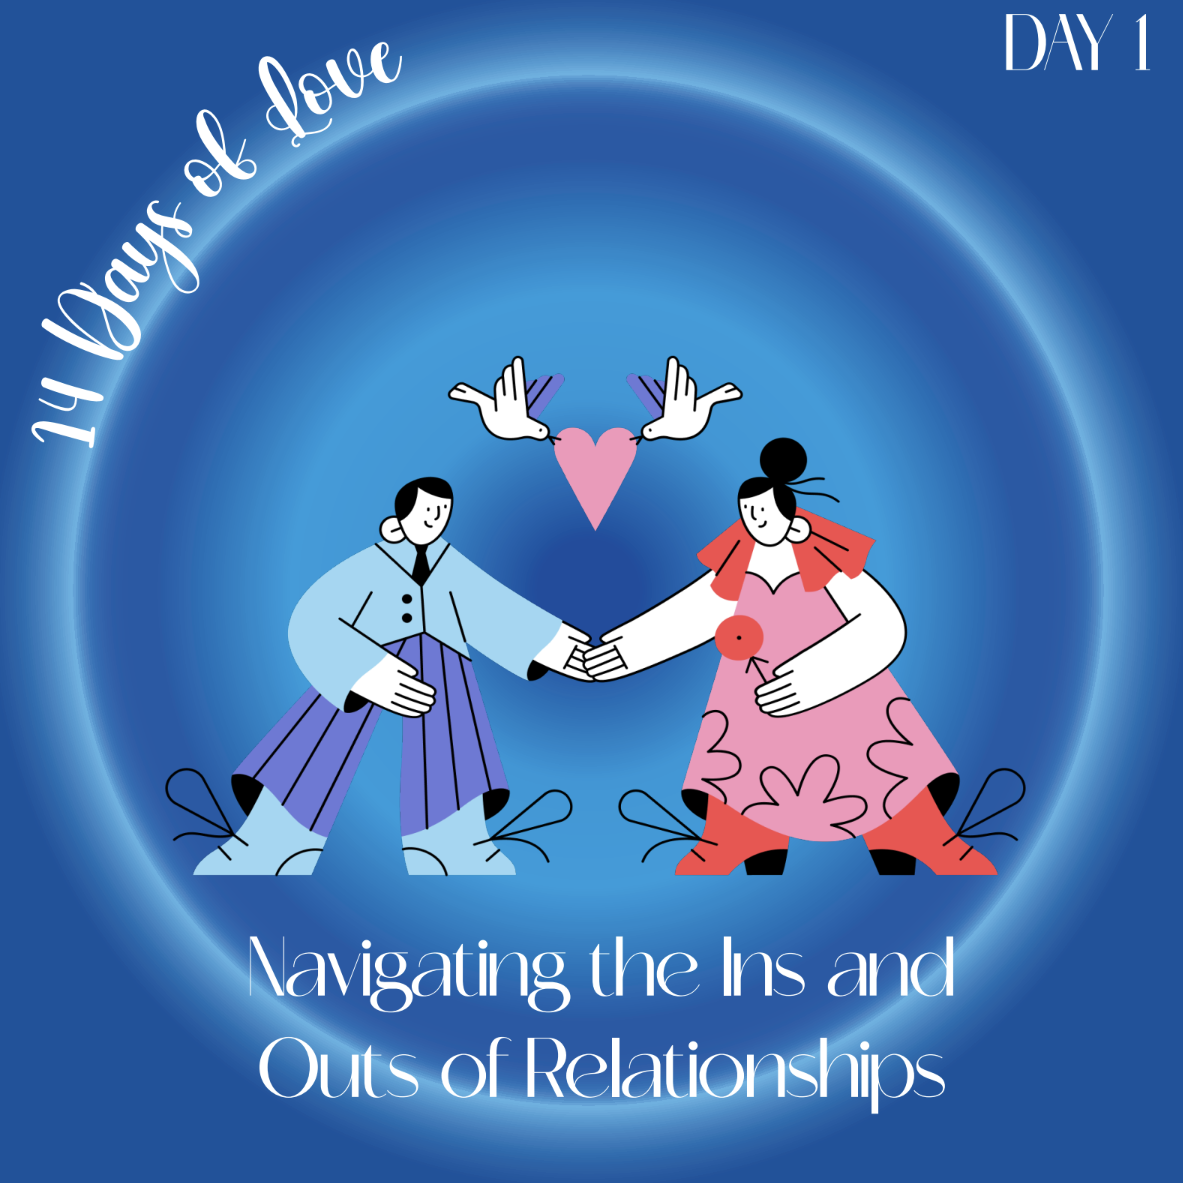 14+Days+of+Love+Day+1%3A+Navigating+the+Ins+and+Outs+of+Relationships